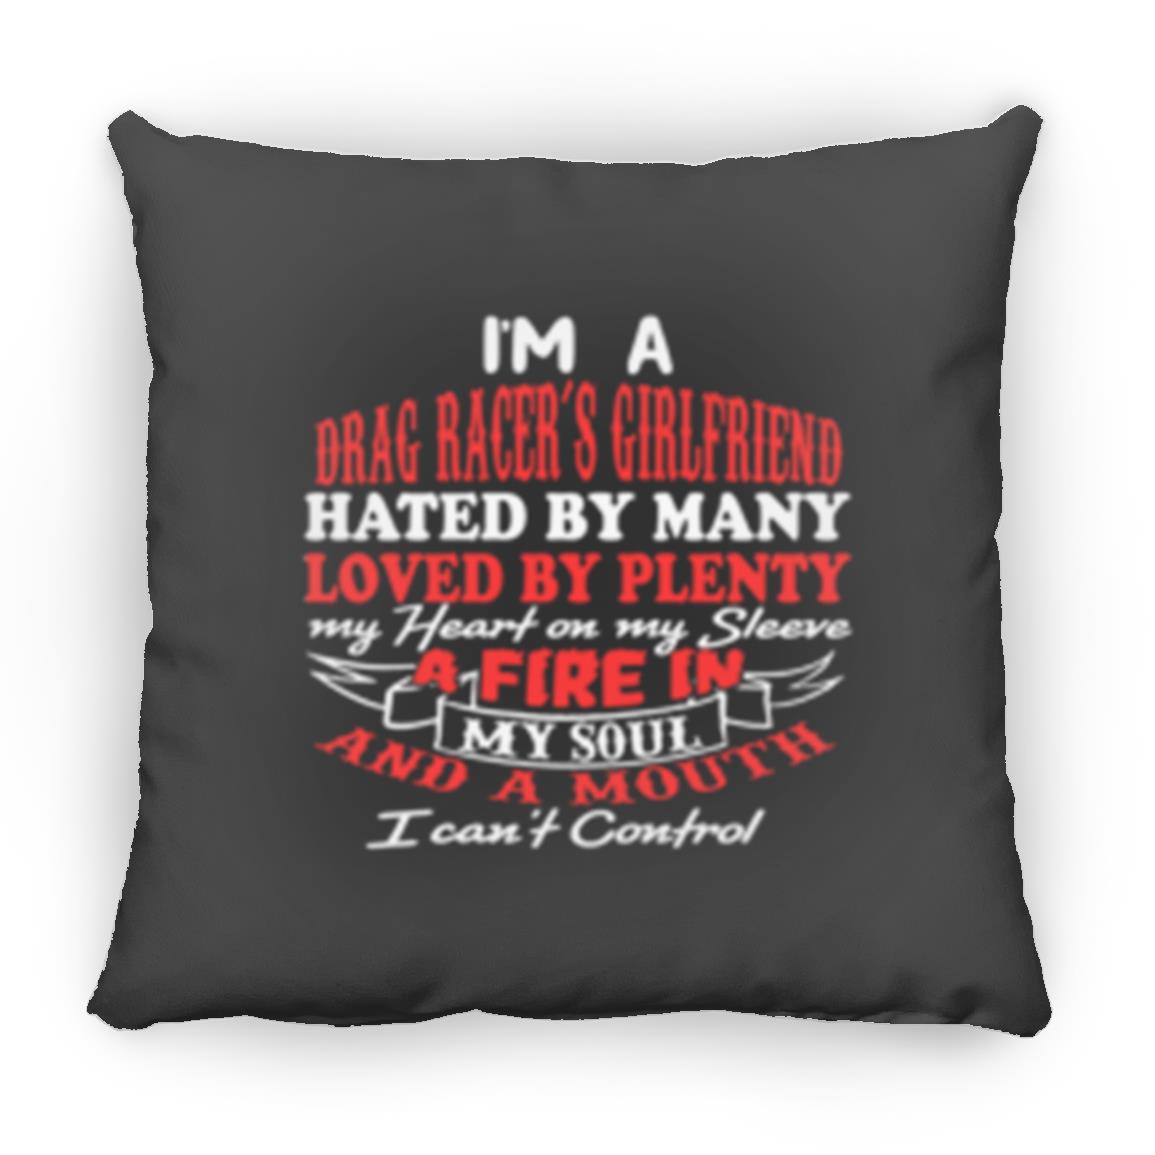 I'm A Drag Racer's Girlfriend Hated By Many Loved By Plenty Small Square Pillow